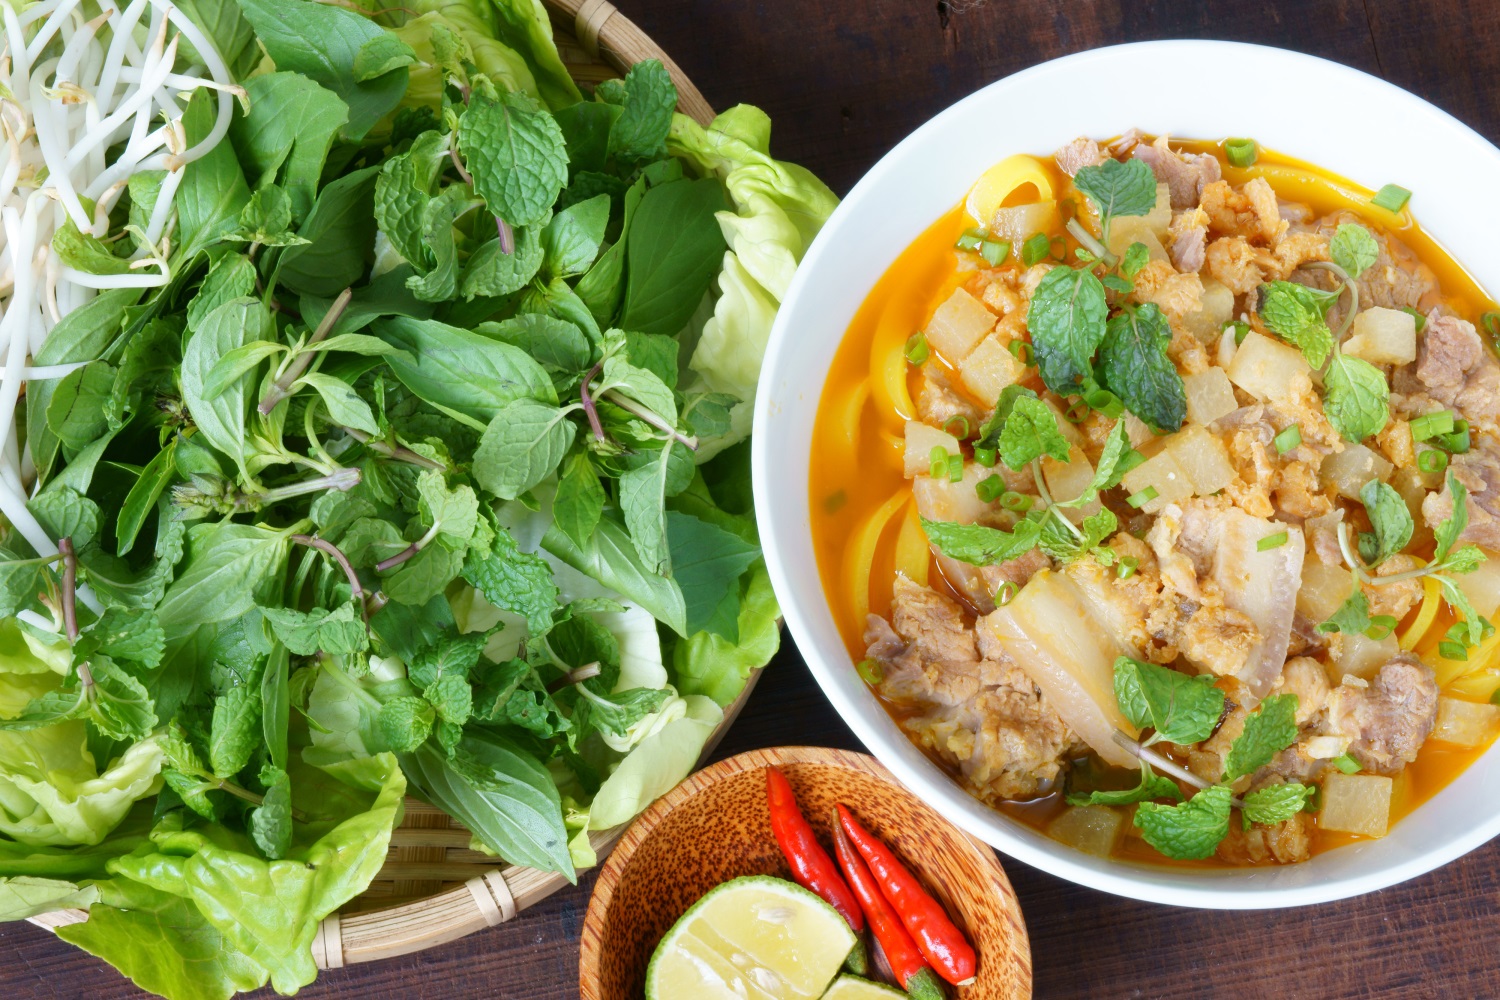 Bowl of mi quang with salad and other ingredients